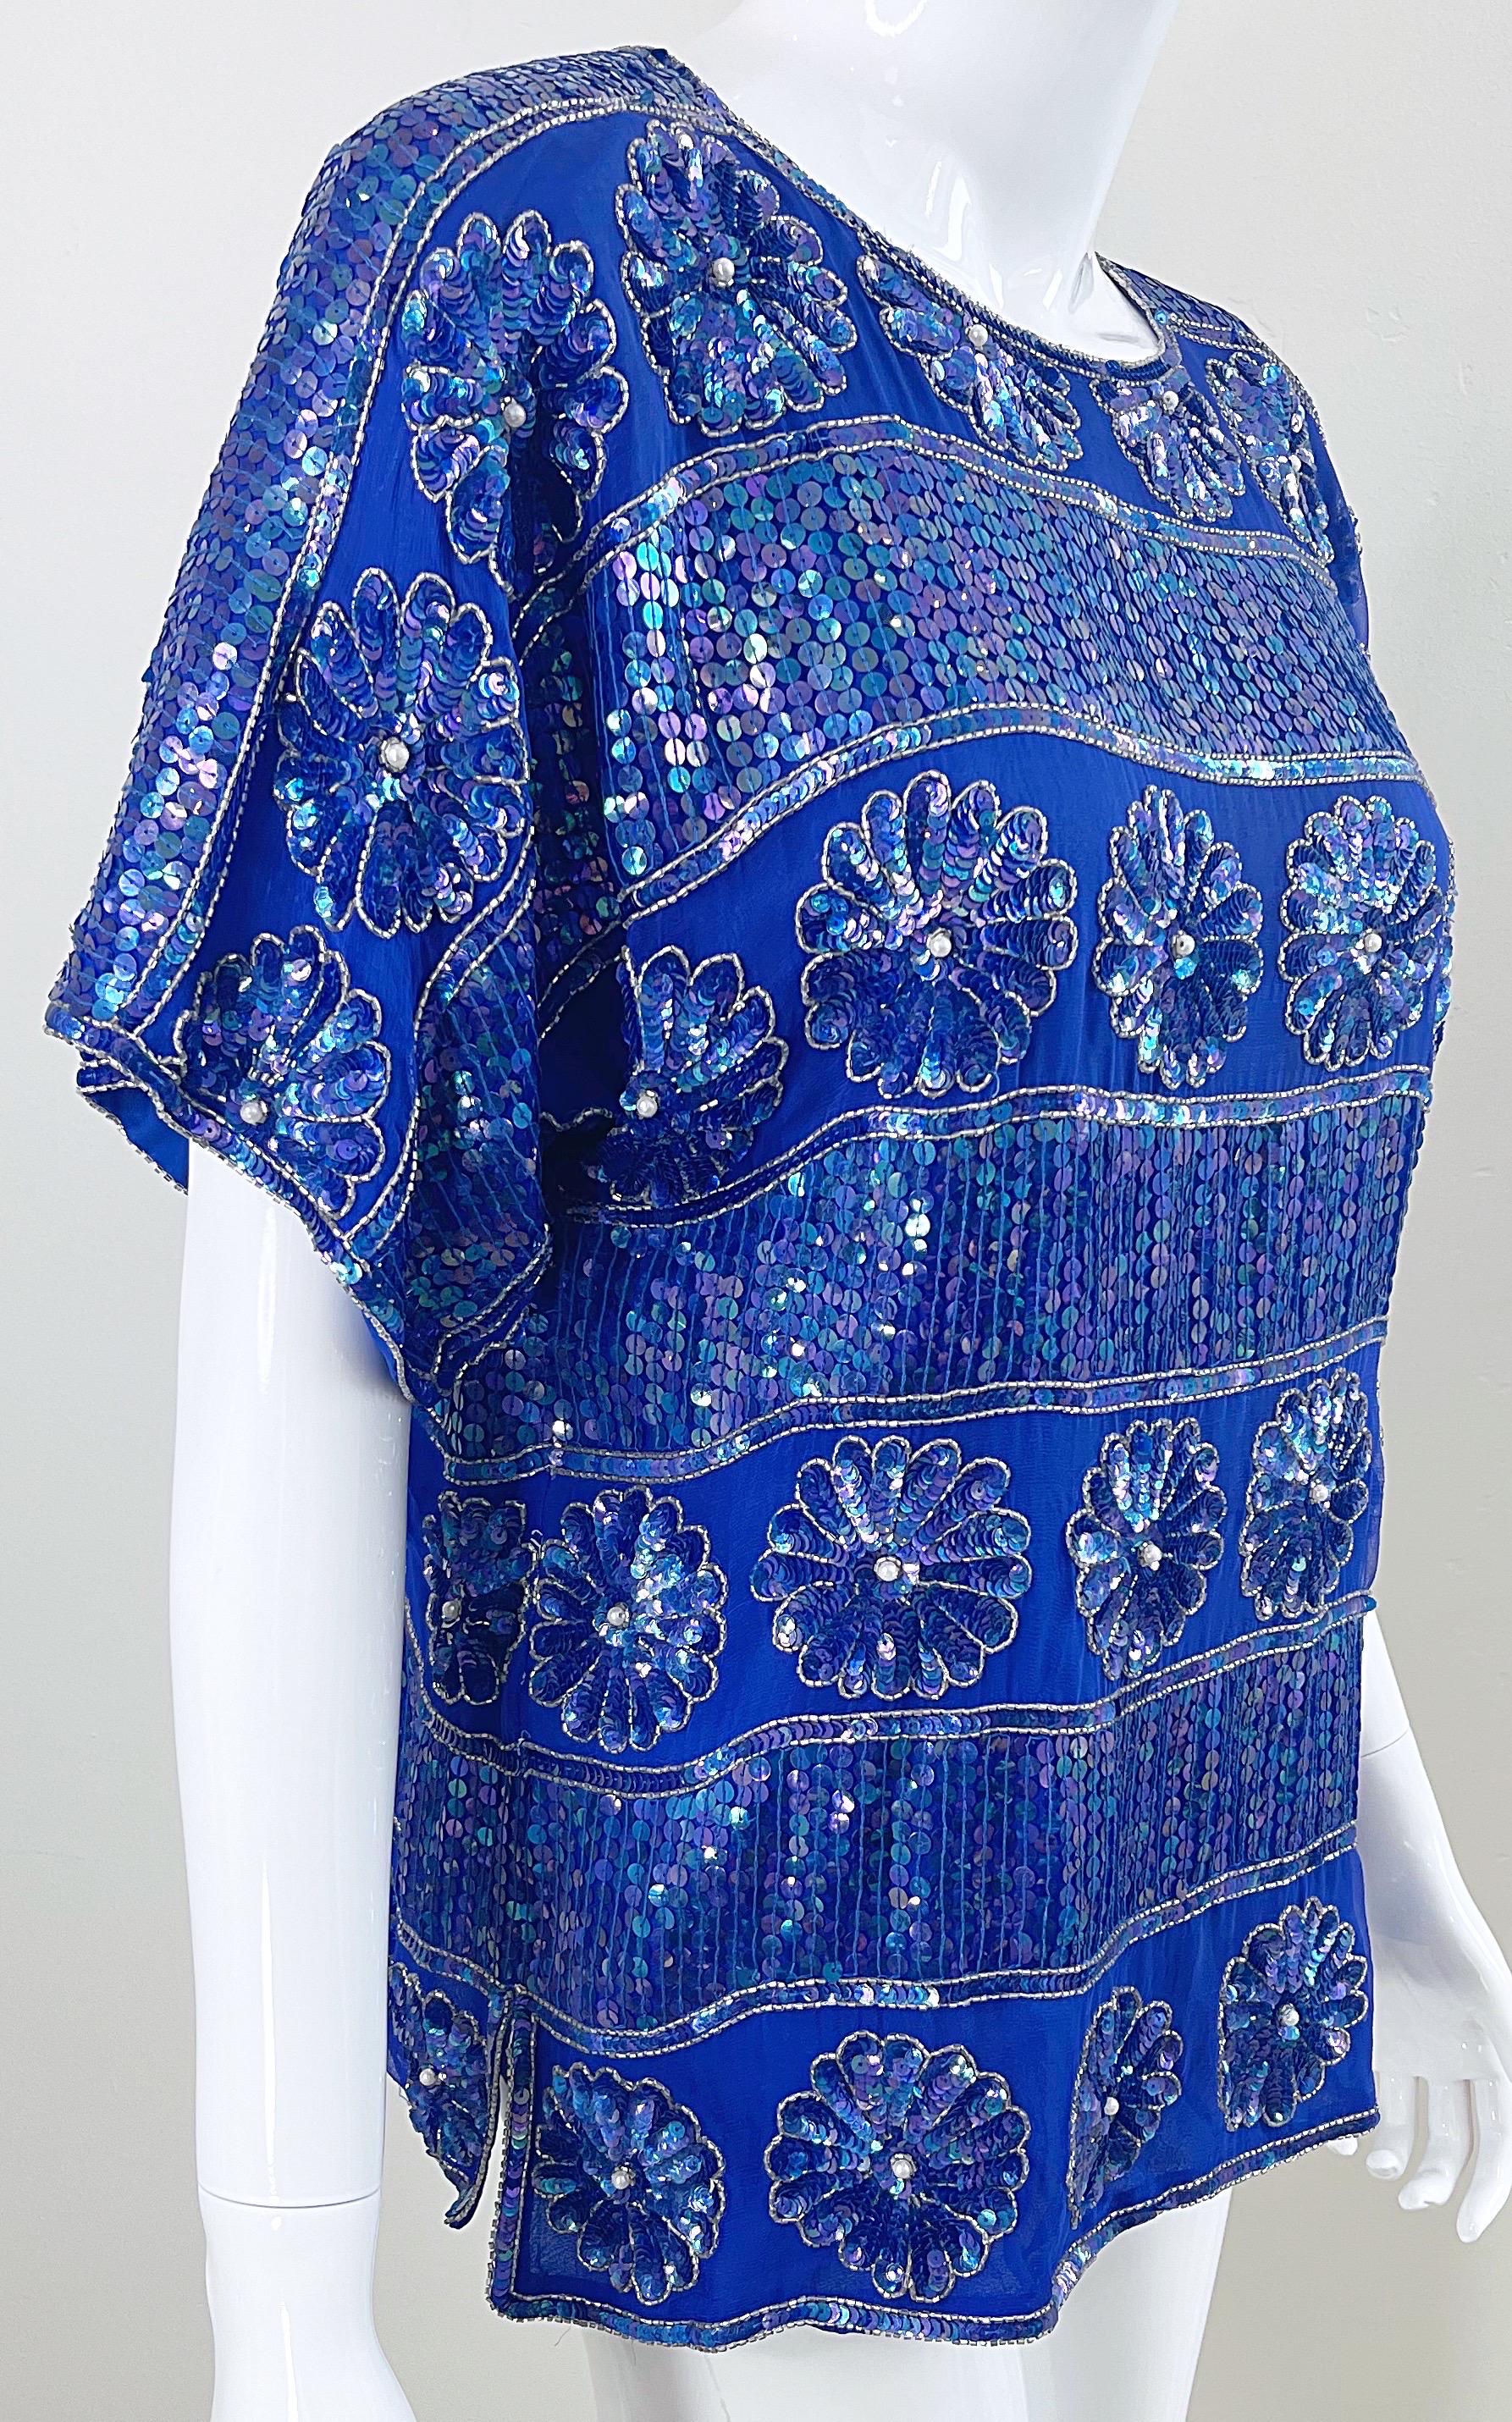 1980s Royal Blue Silk Chiffon Sequin Beaded Pearl Vintage 80s Blouse Shirt Top For Sale 1